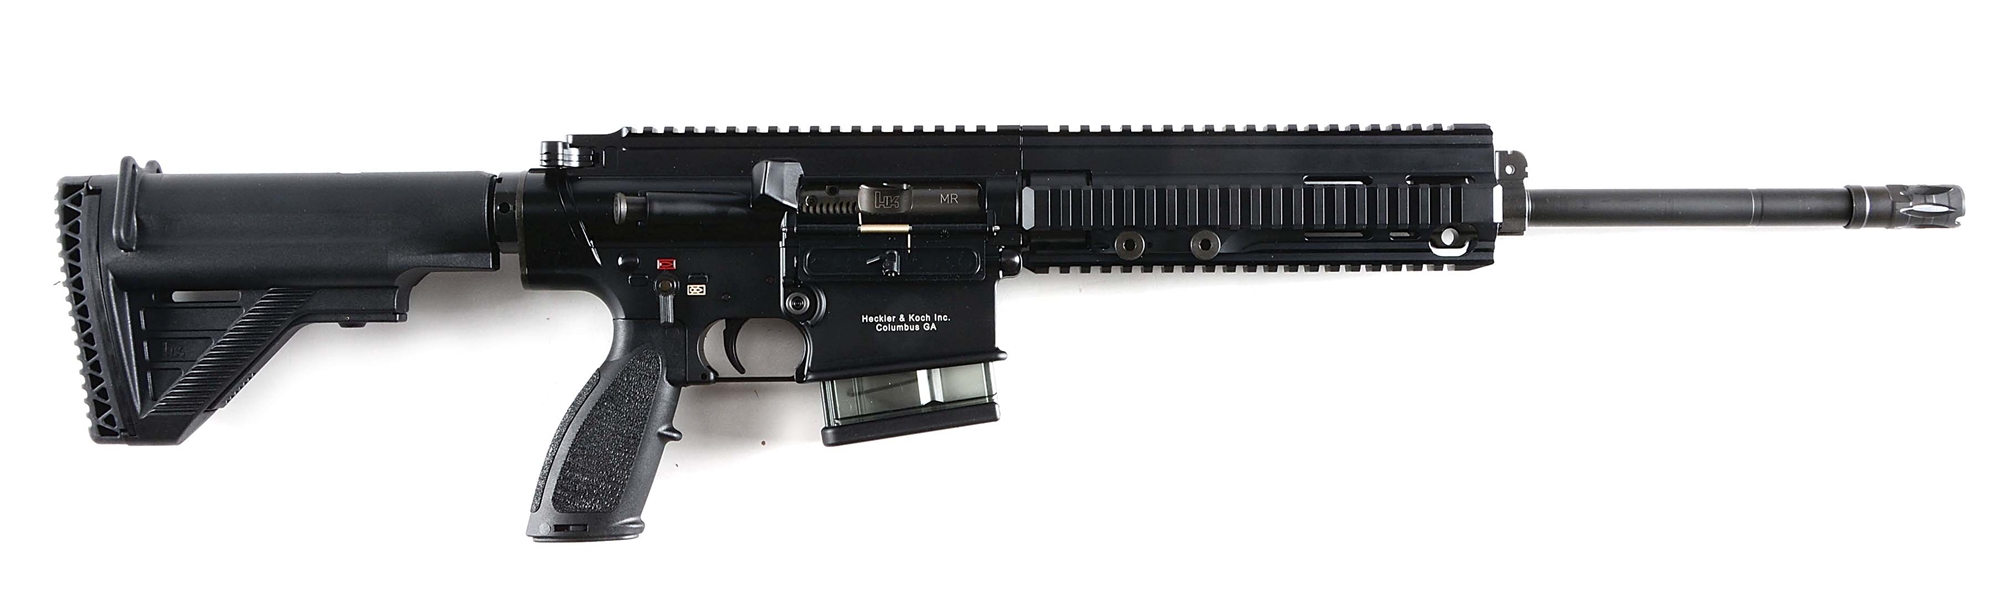 (M) HECKLER AND KOCH MR762A1 SEMI AUTOMATIC RIFLE